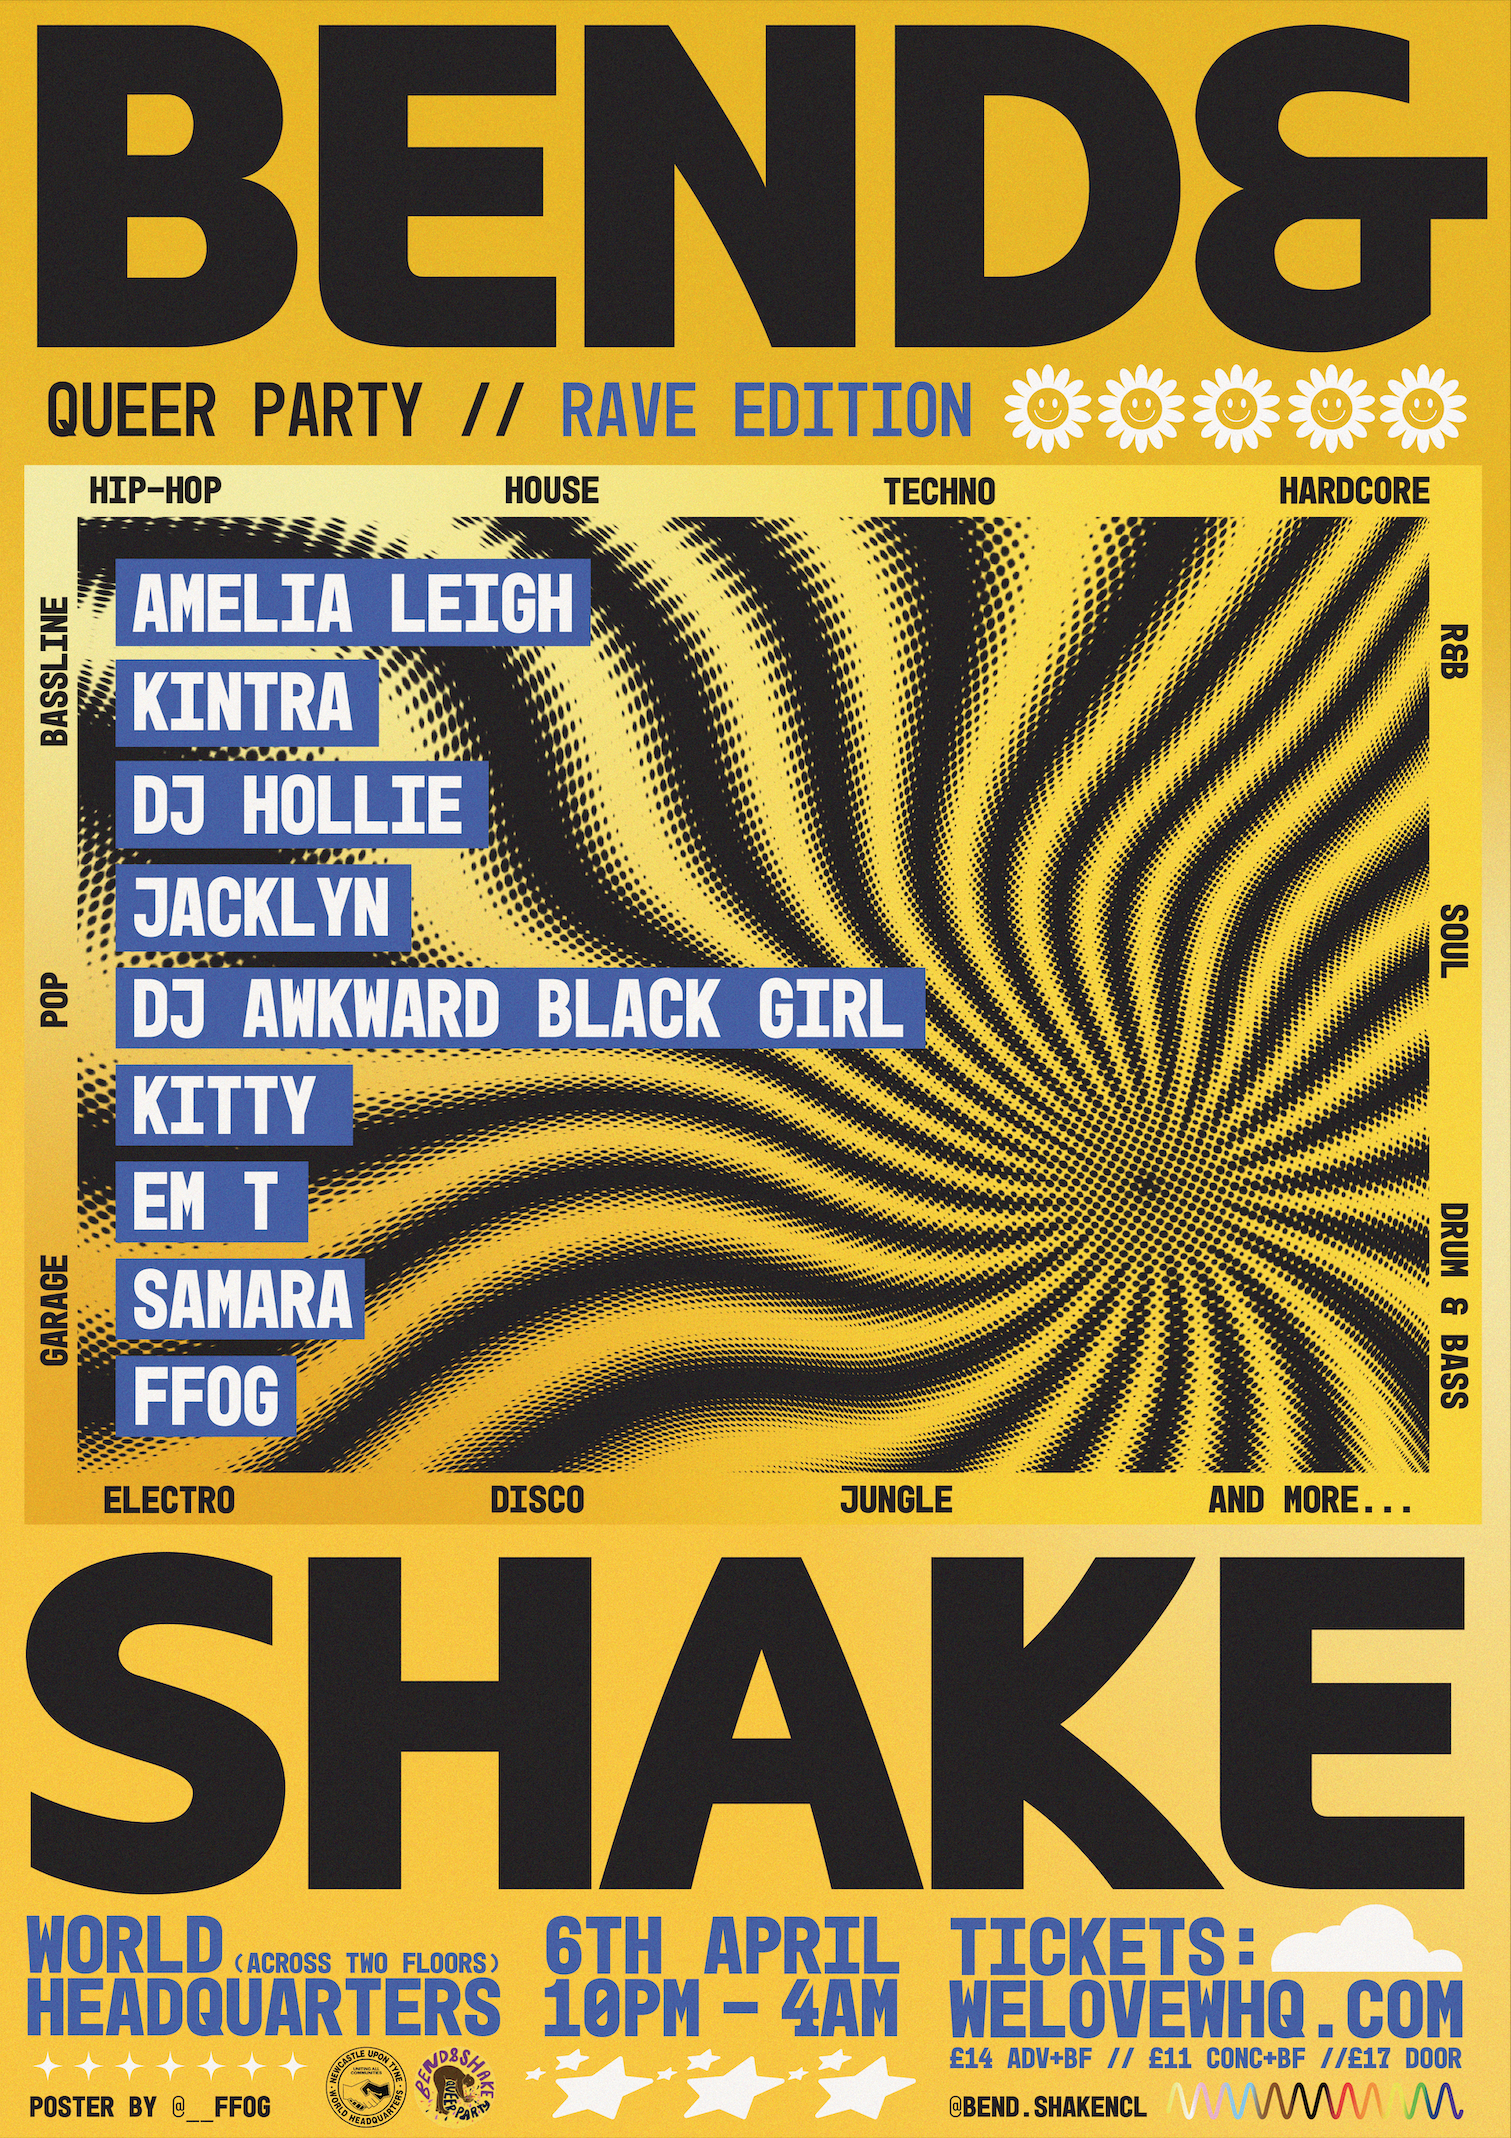 Bend& Shake - Queer Party - Easter Rave Edition - フライヤー表